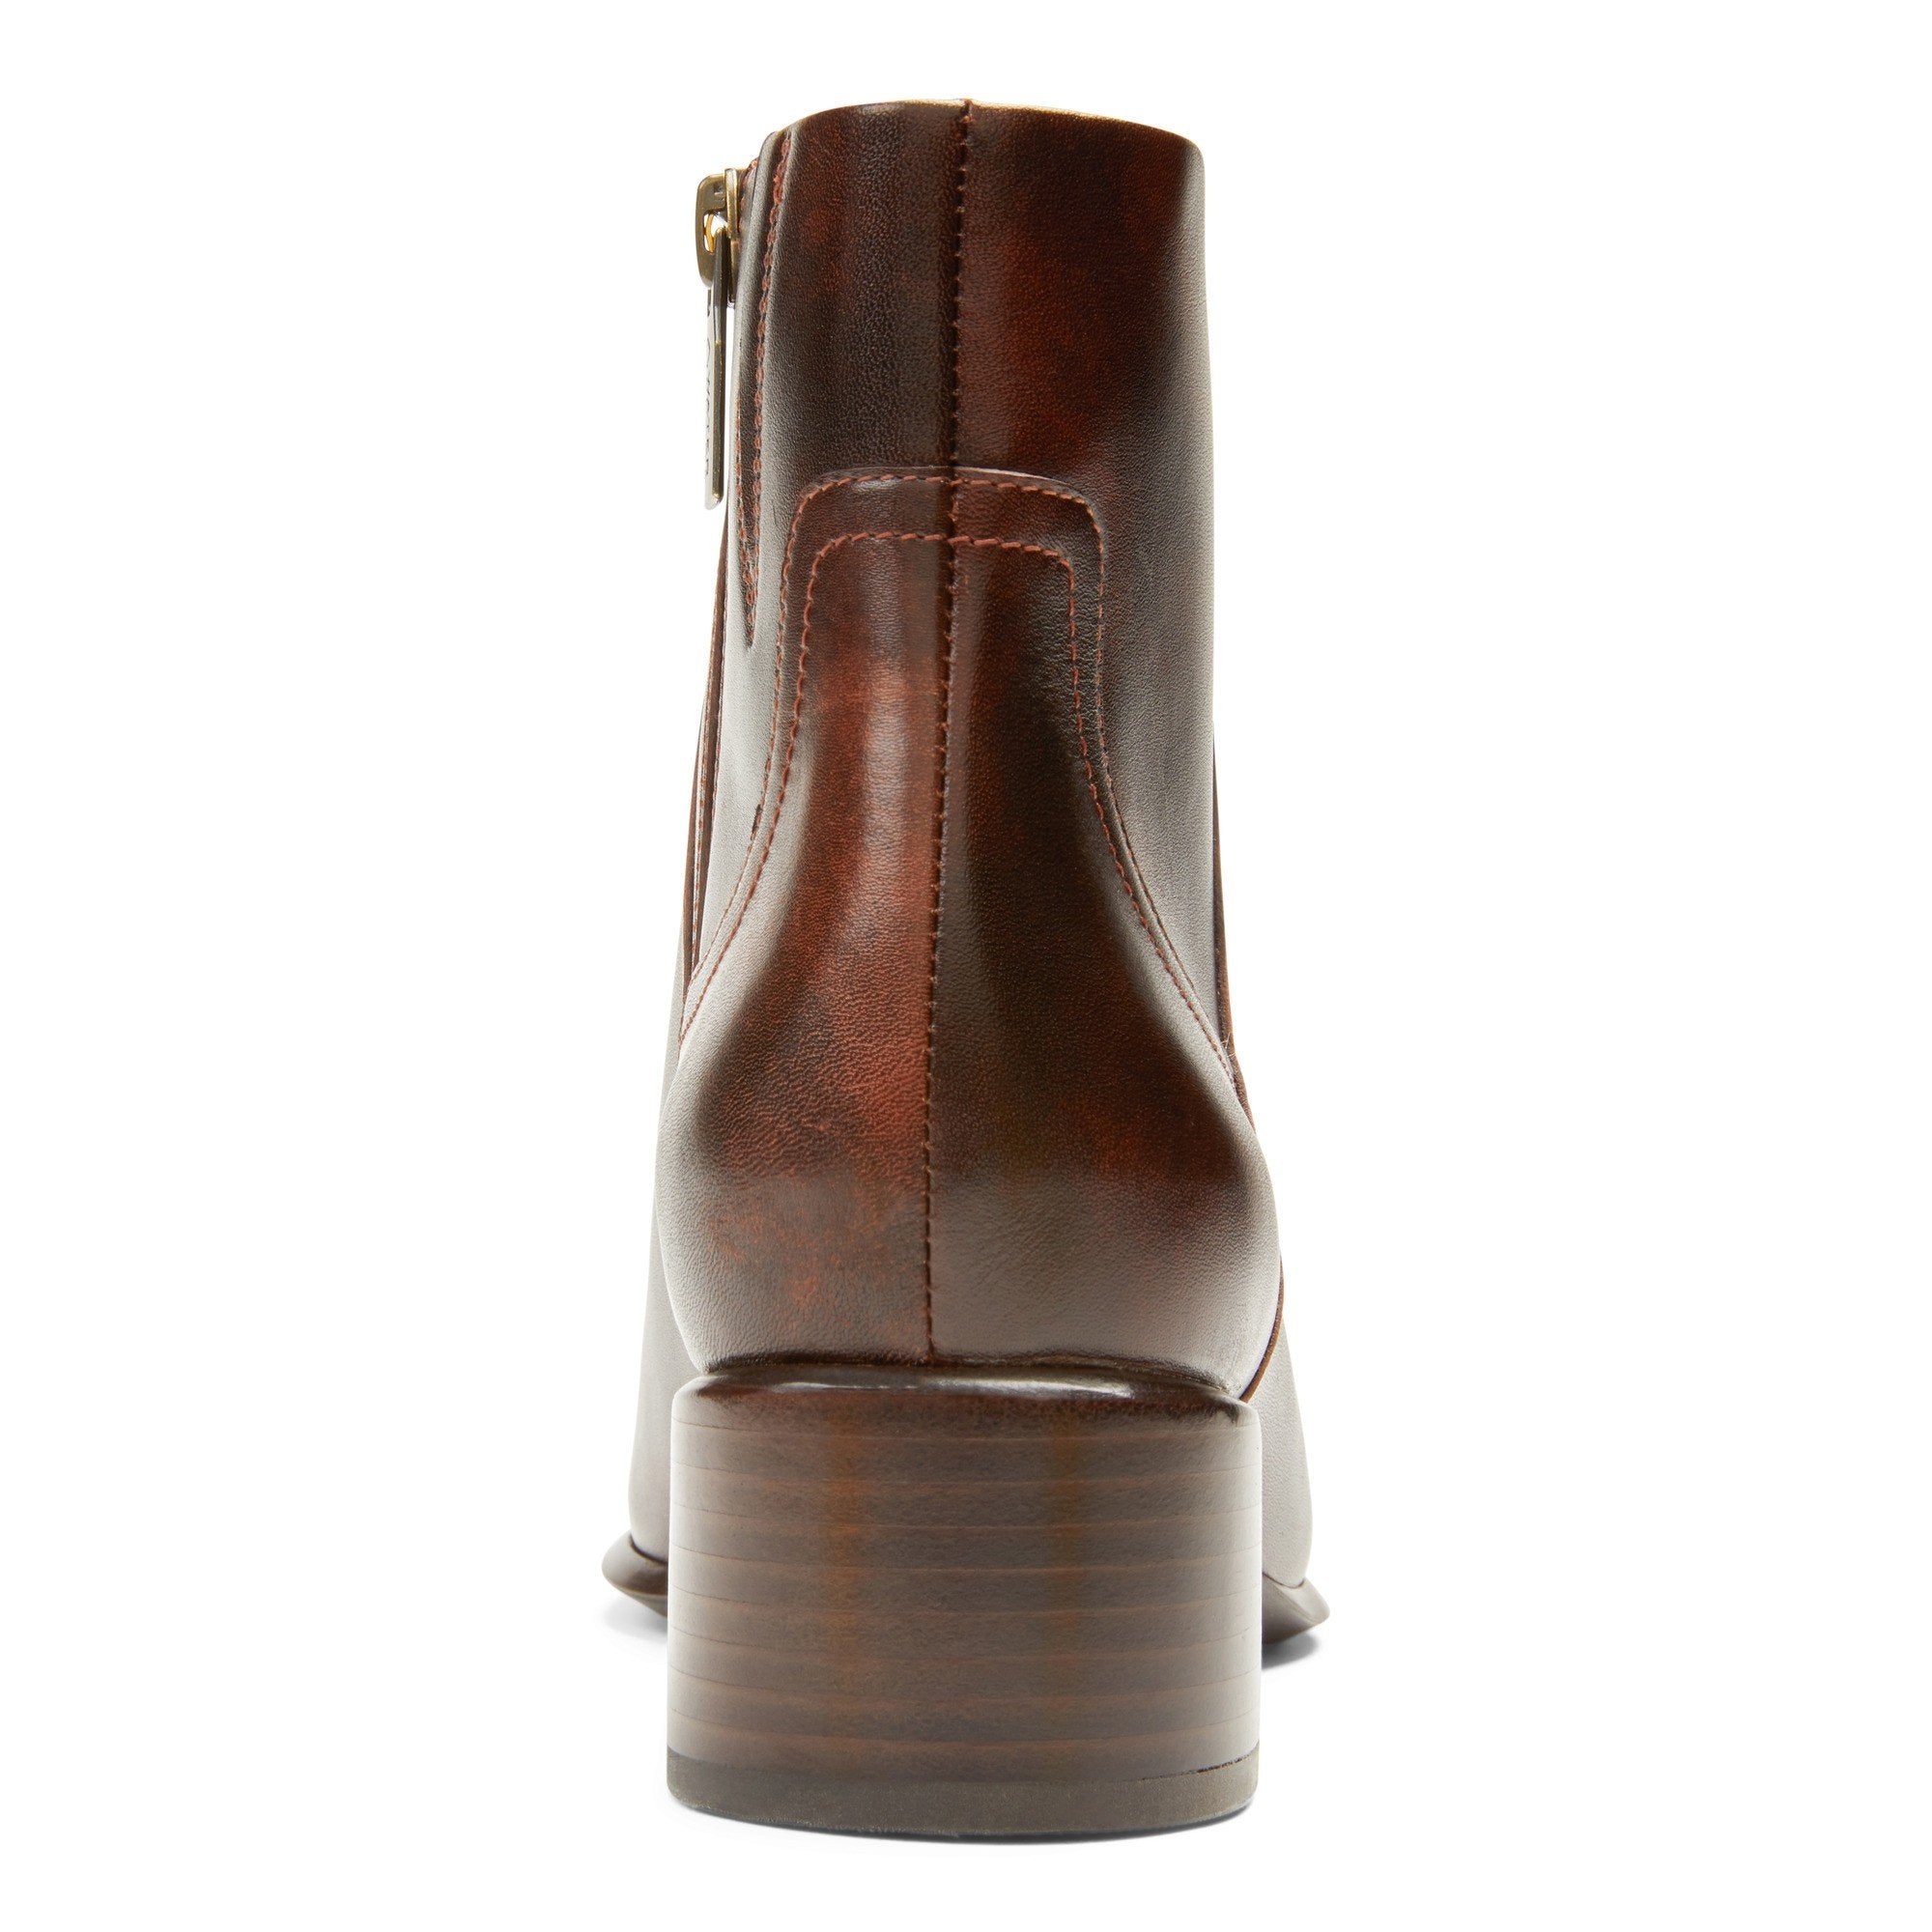 Chocolate Waterproof Ankle Boot by Vionic